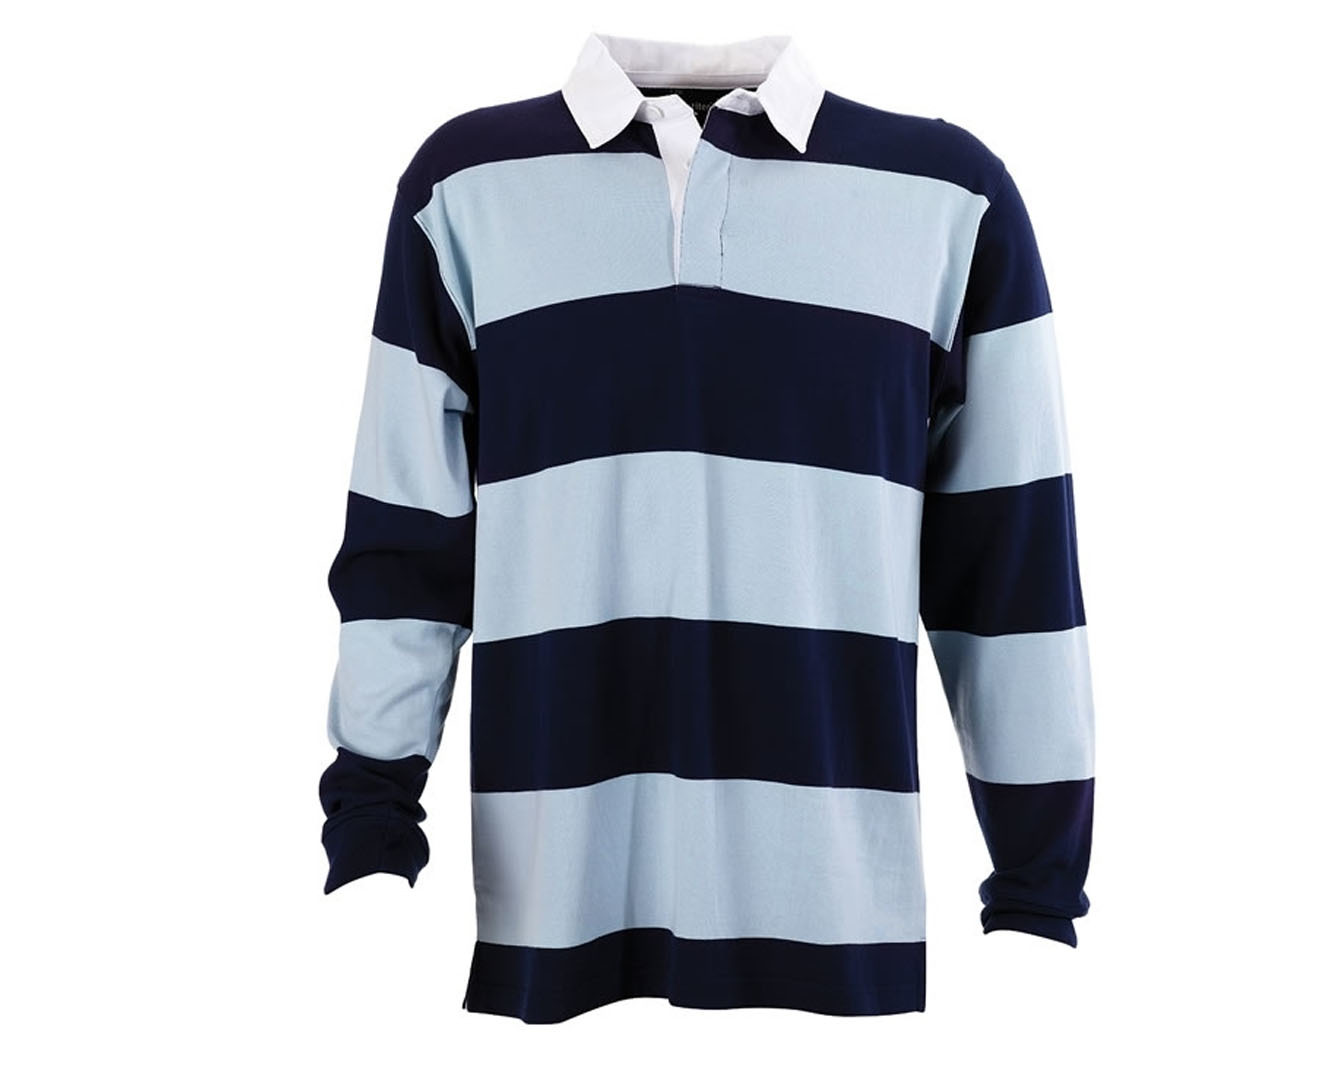 long sleeve rugby jersey